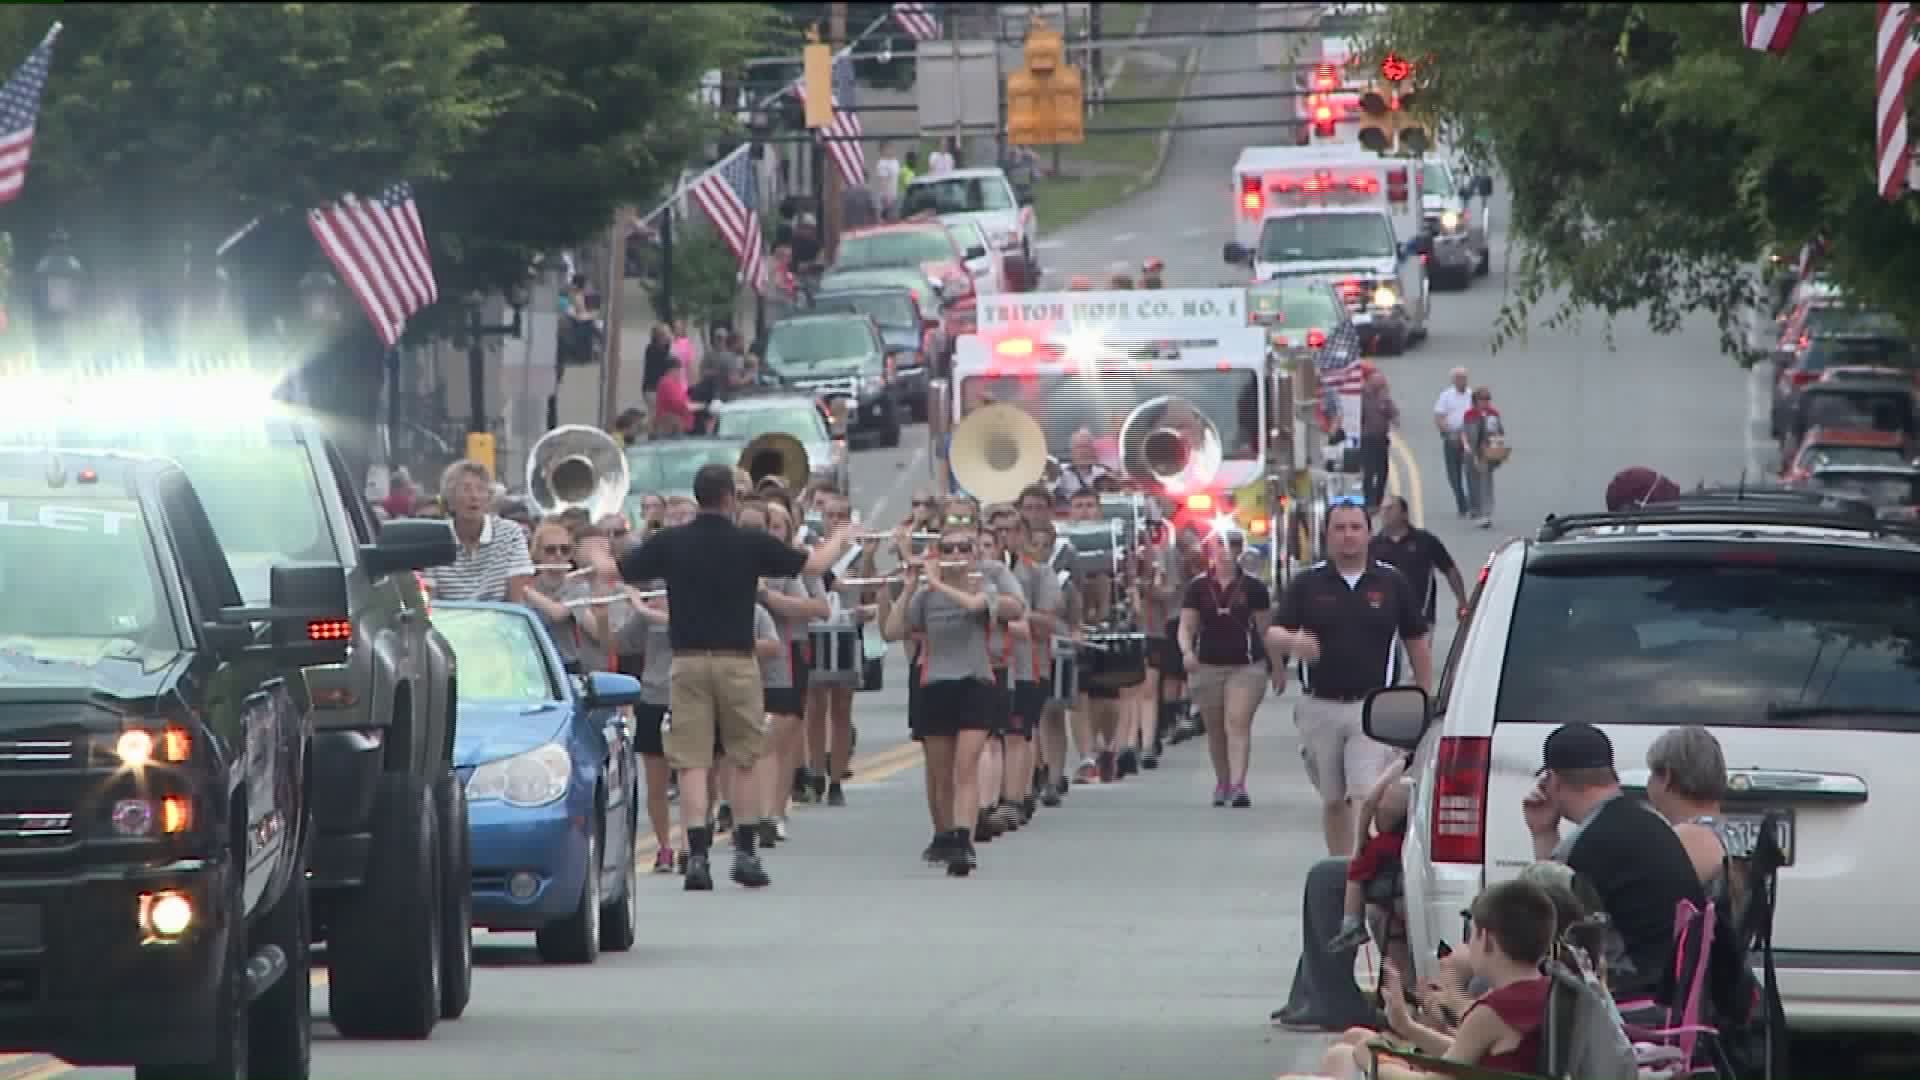 Annual Firefighter's Parade Hits Tunkhannock